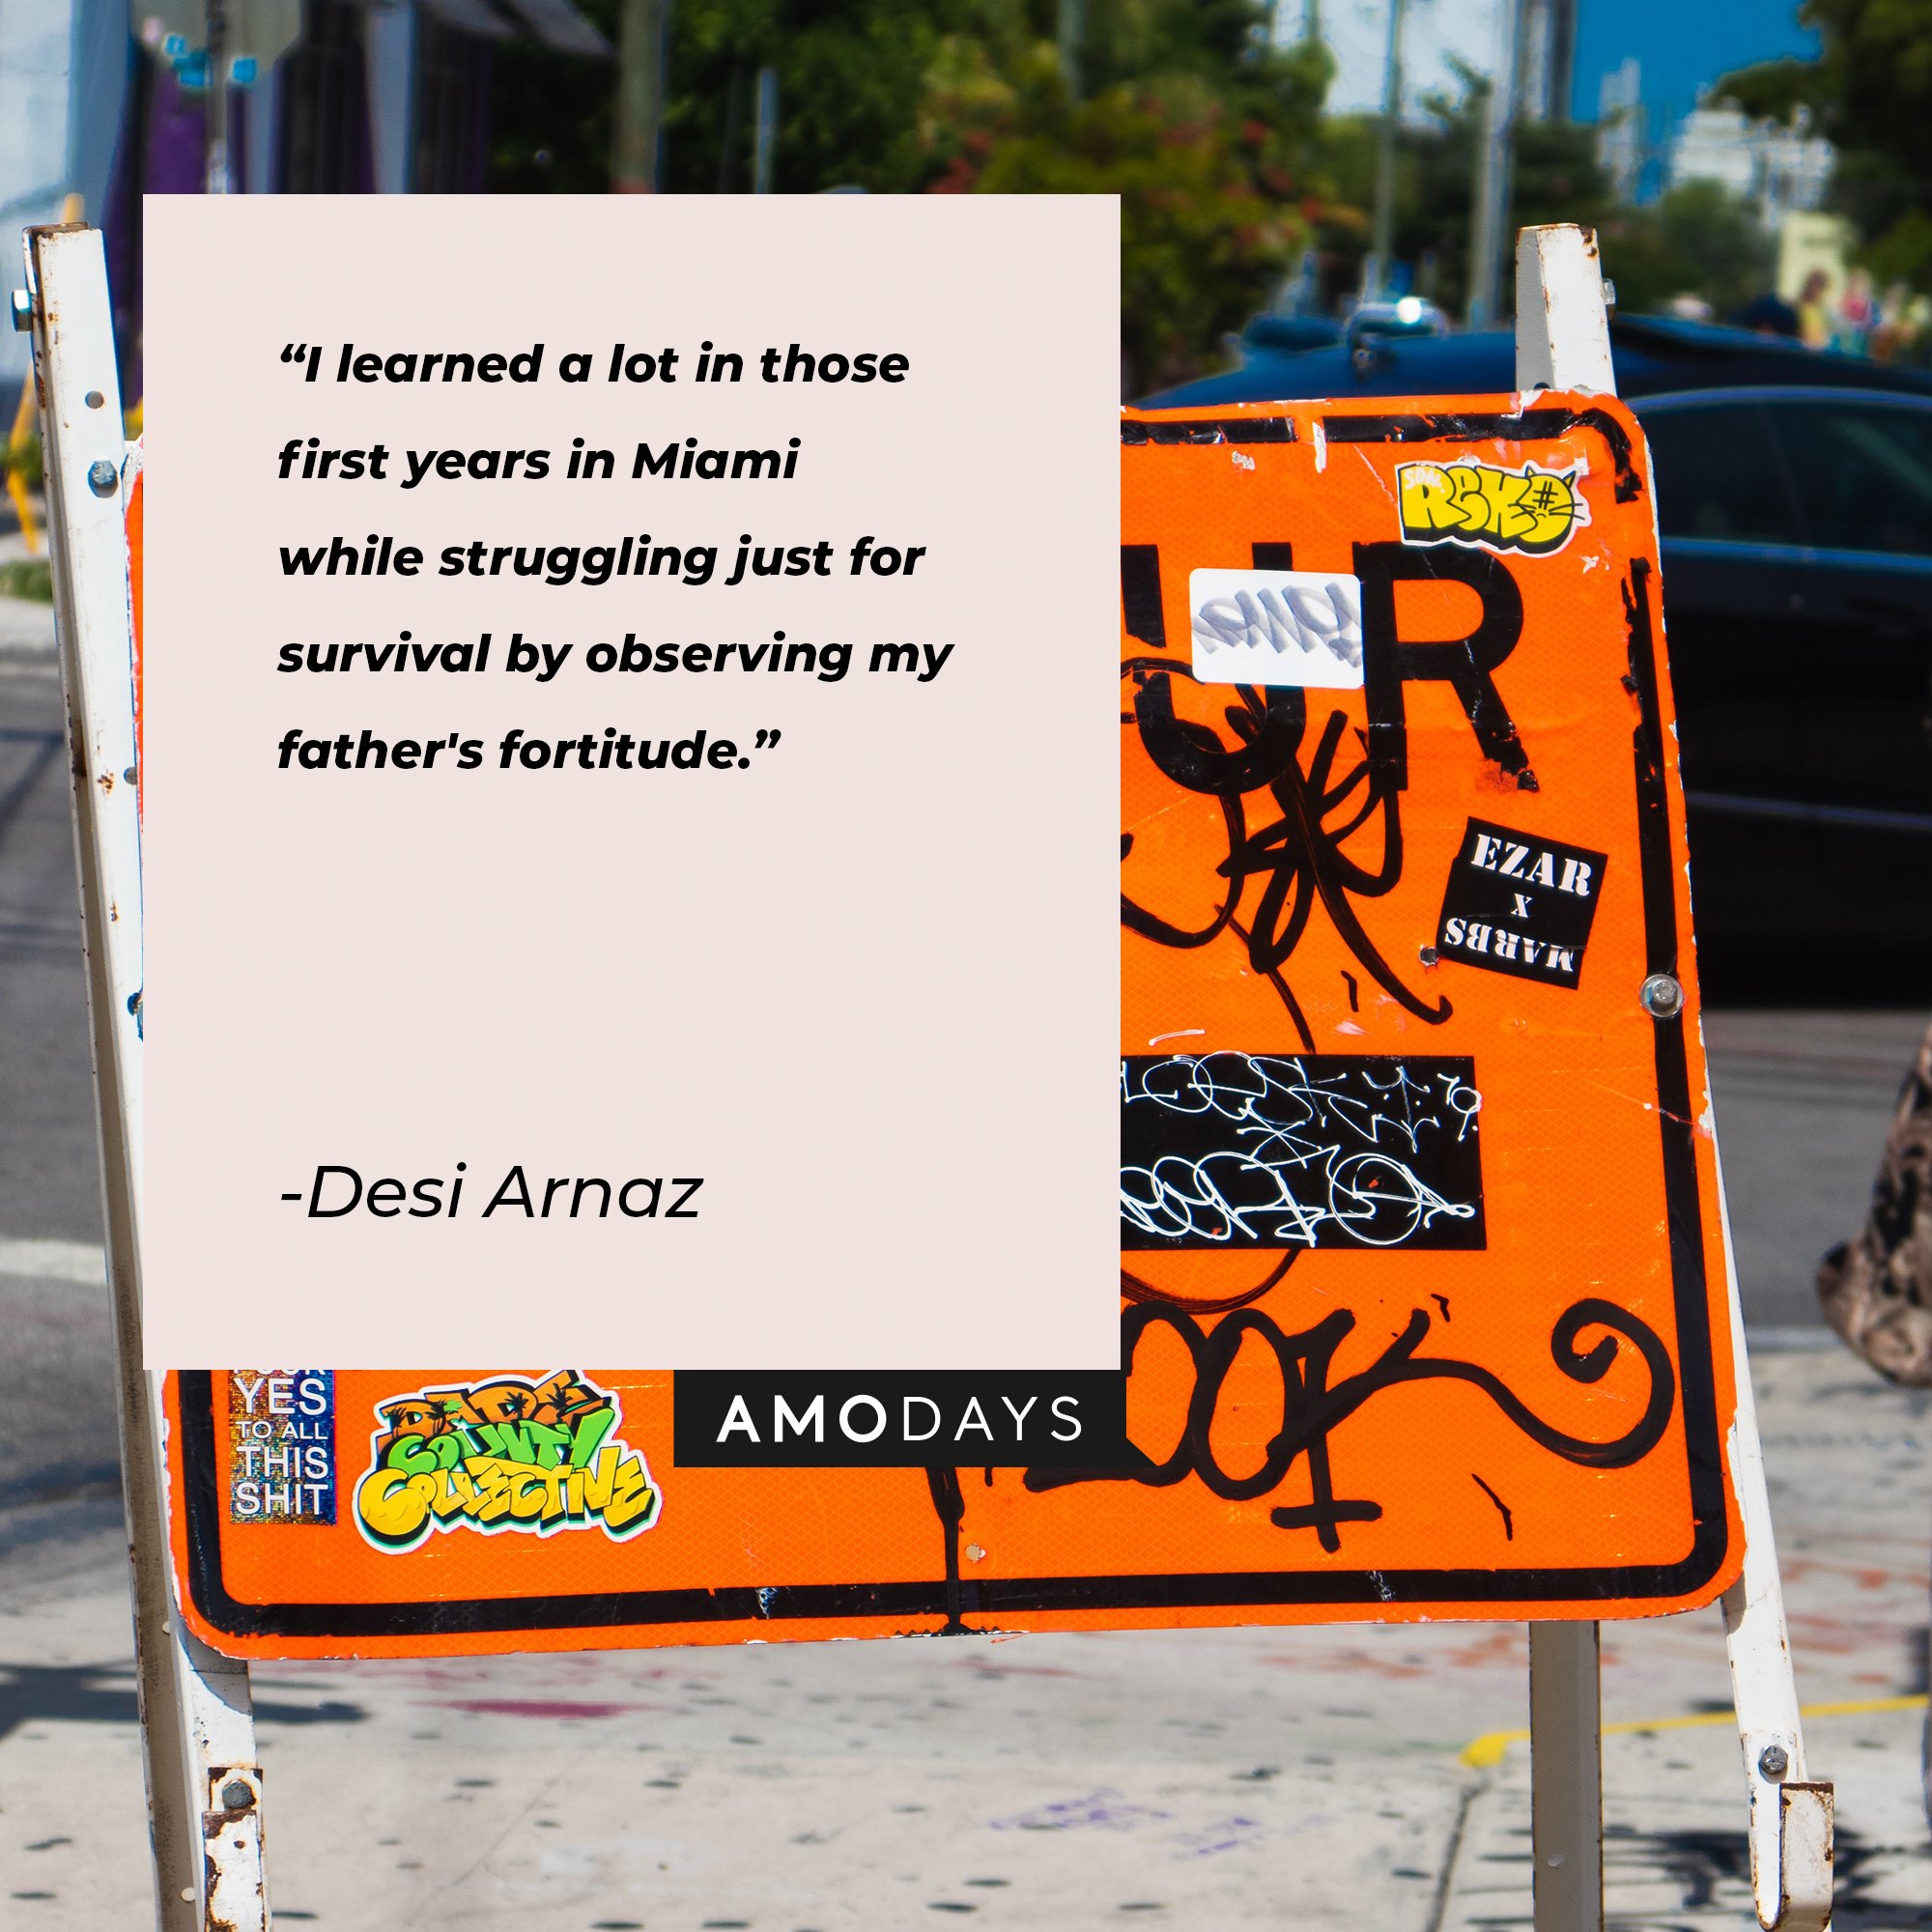 Desi Arnaz’ quote: "I learned a lot in those first years in Miami while struggling just for survival by observing my father's fortitude.”  | Image: AmoDays